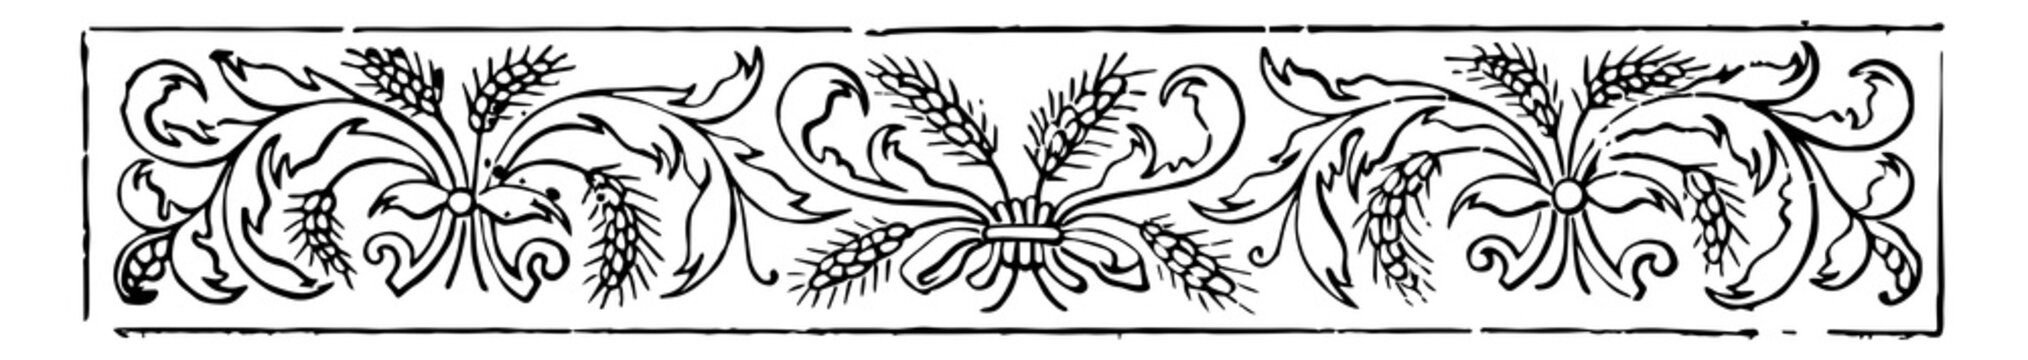 Banner have contains an image of several stocks of wheat in this design vintage engraving.